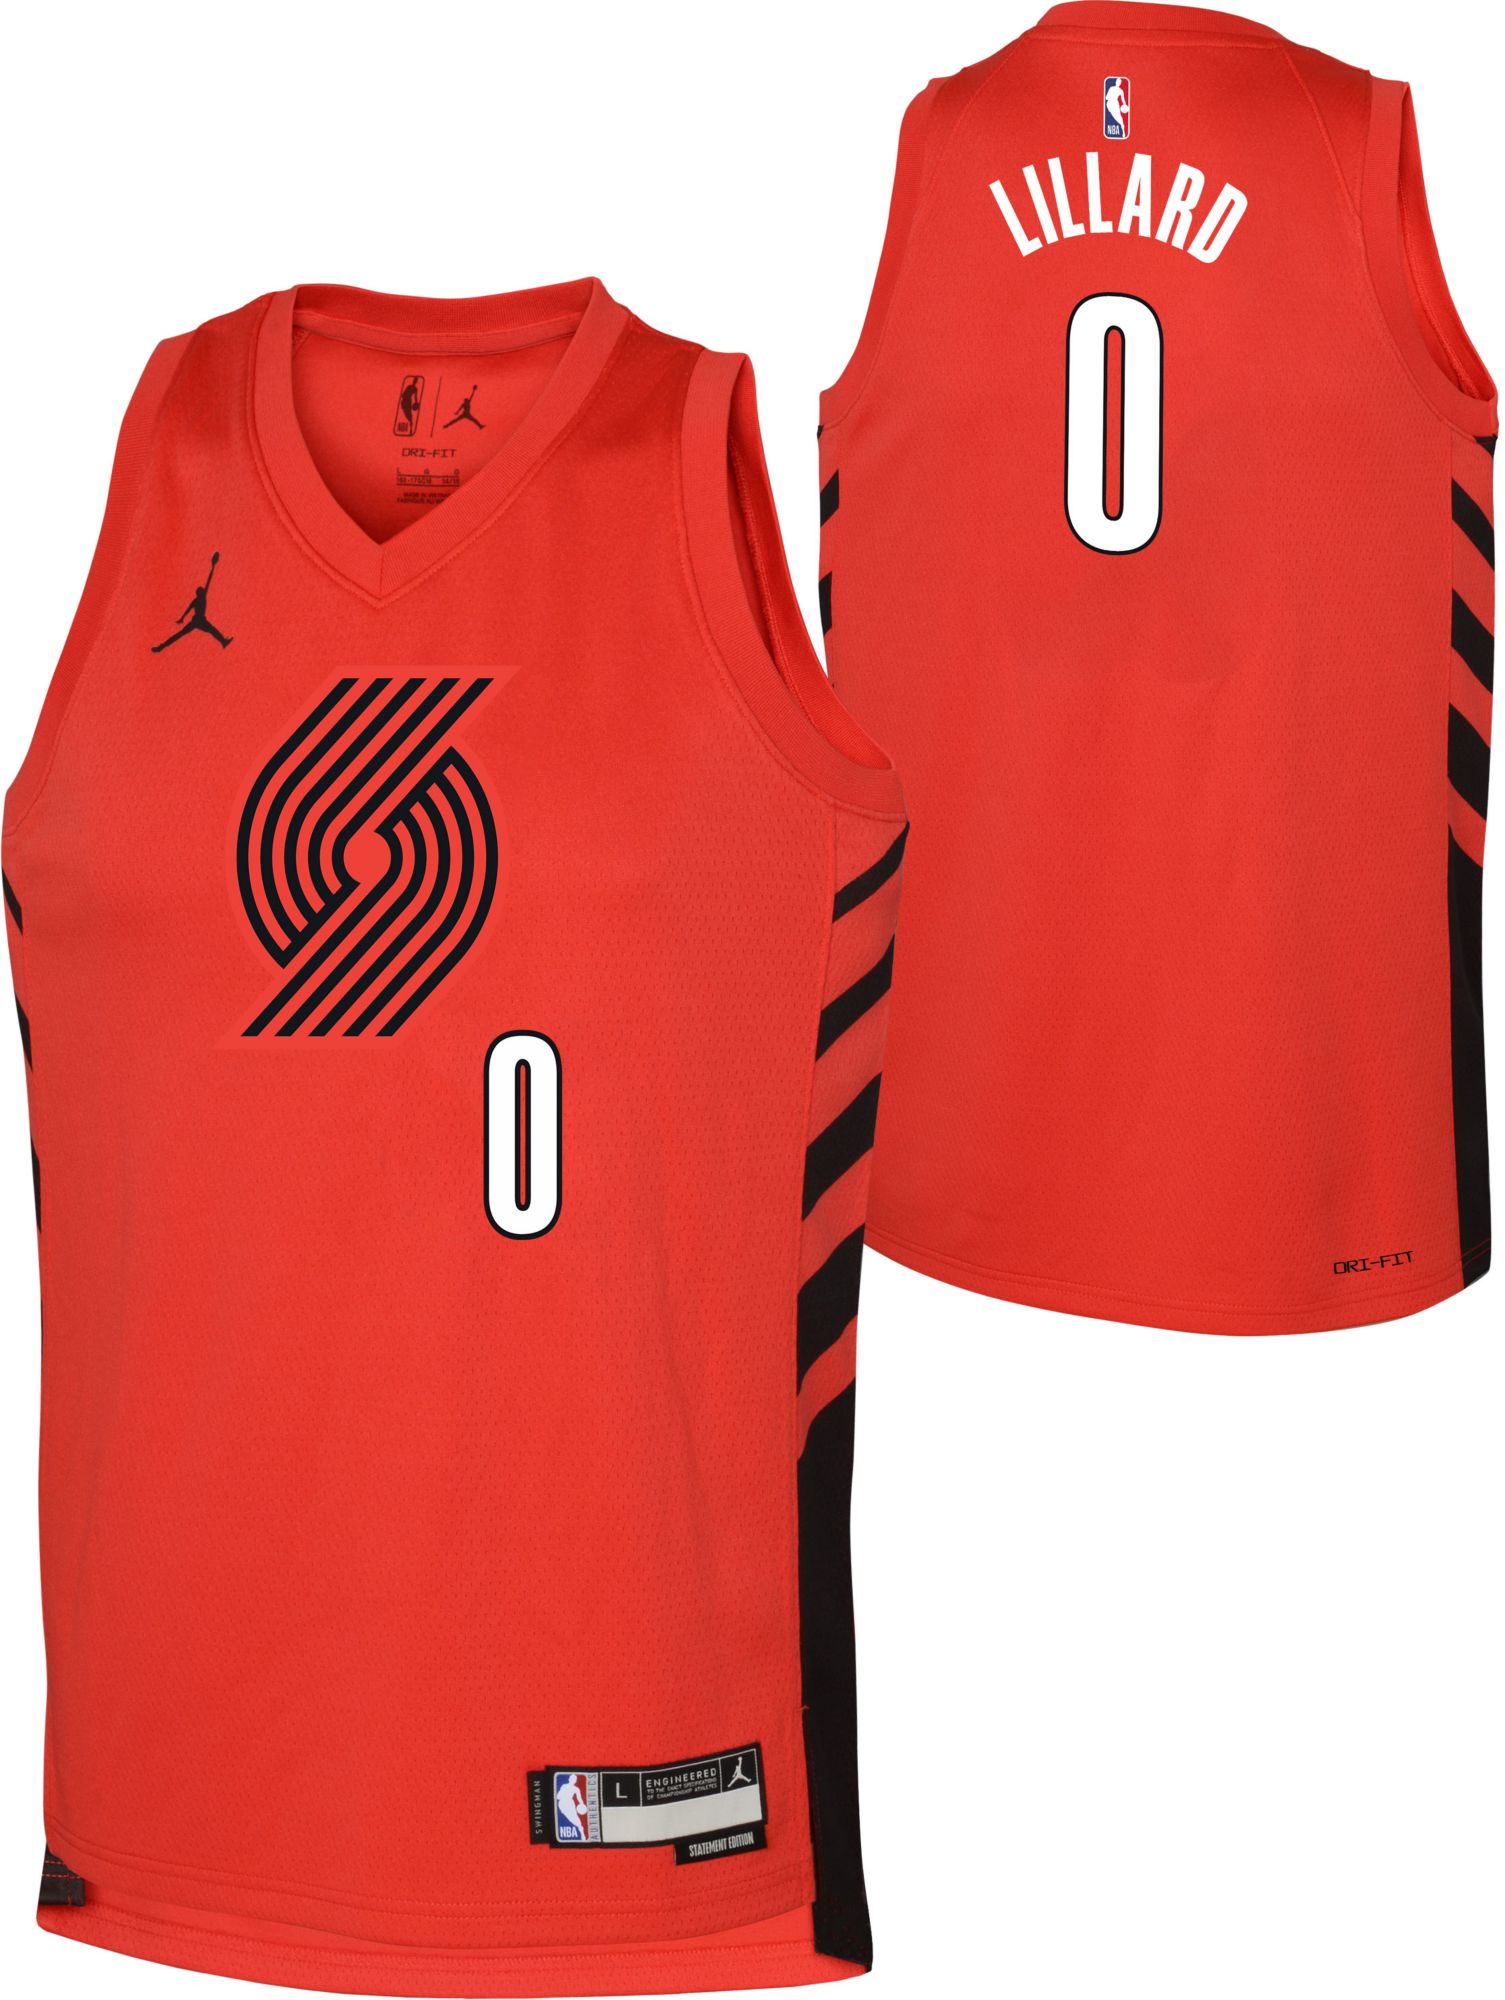 Experience The Fusion of Sports with The Trail Blazers Baseball Jersey 4XL